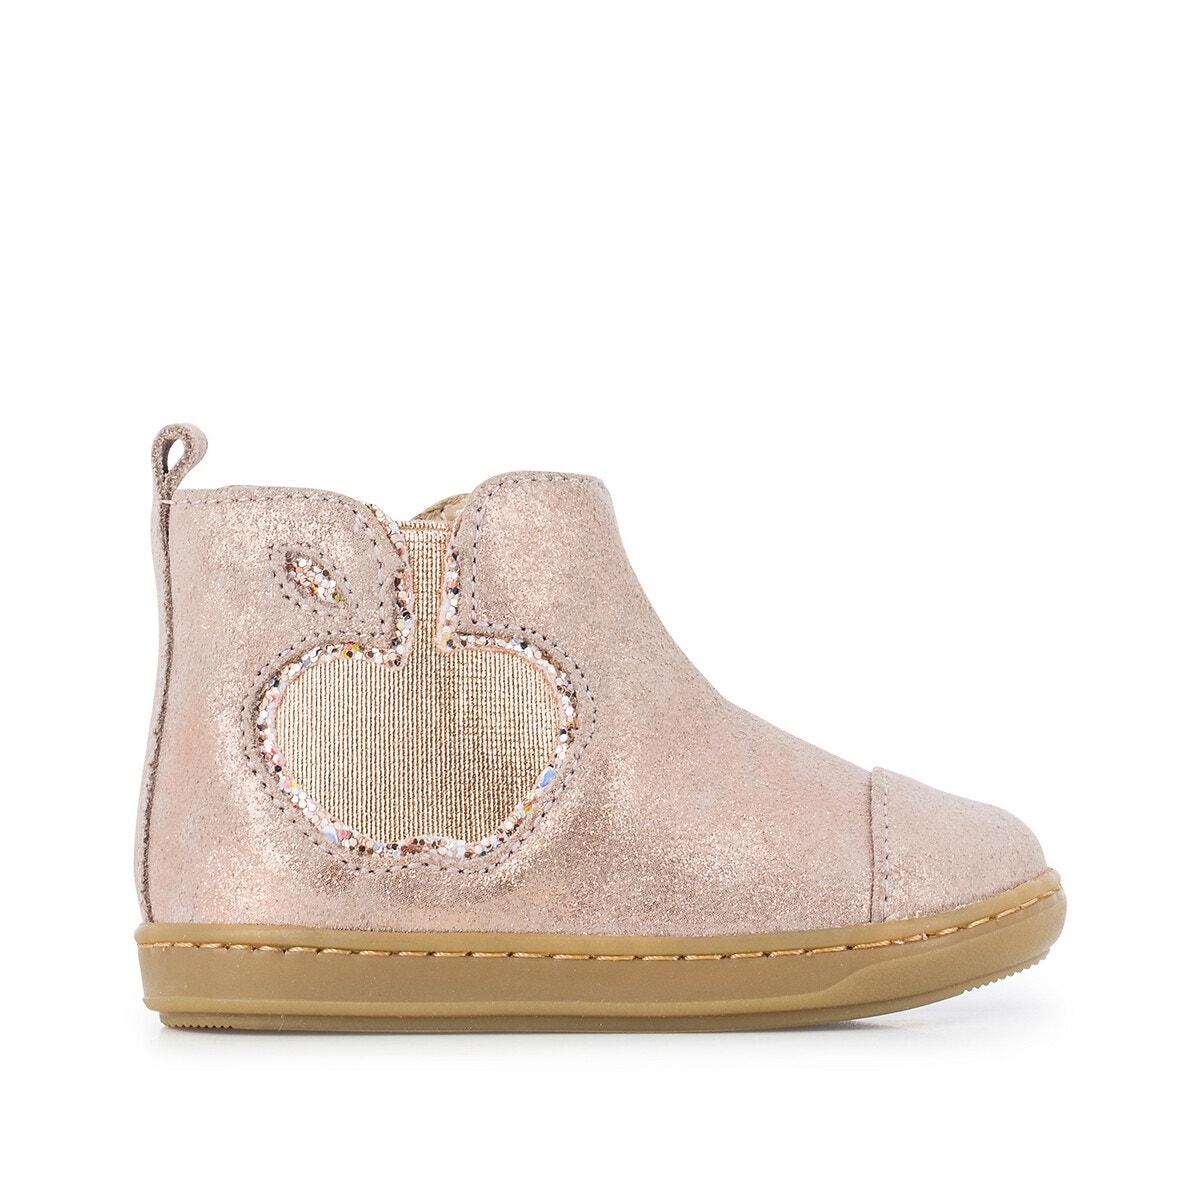 Kids Bouba New Apple Ankle Boots in Suede ΠΑΙΔΙ | Παπούτσια | Μποτάκια